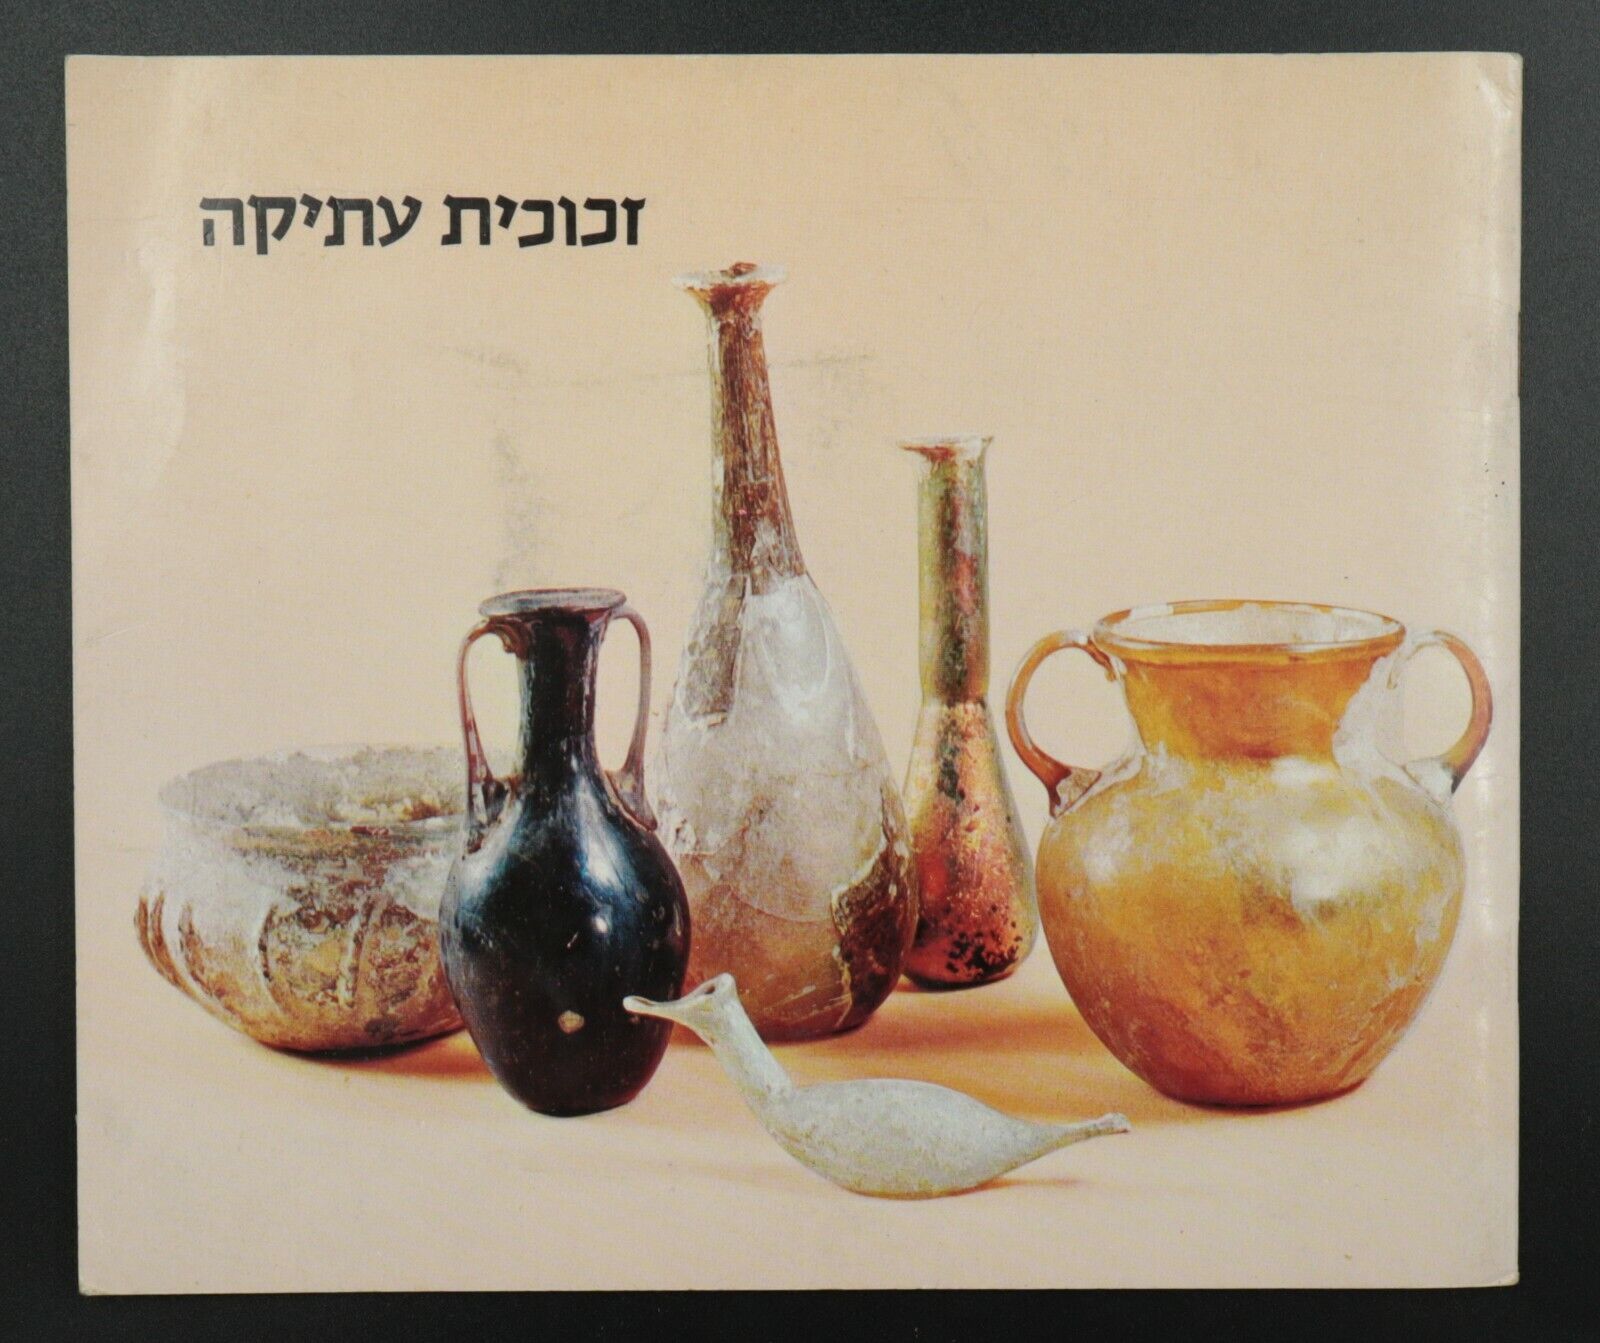 Ancient Glass Catalog - Israel Museum in Jerusalem 1981 Archaeology Exhibition